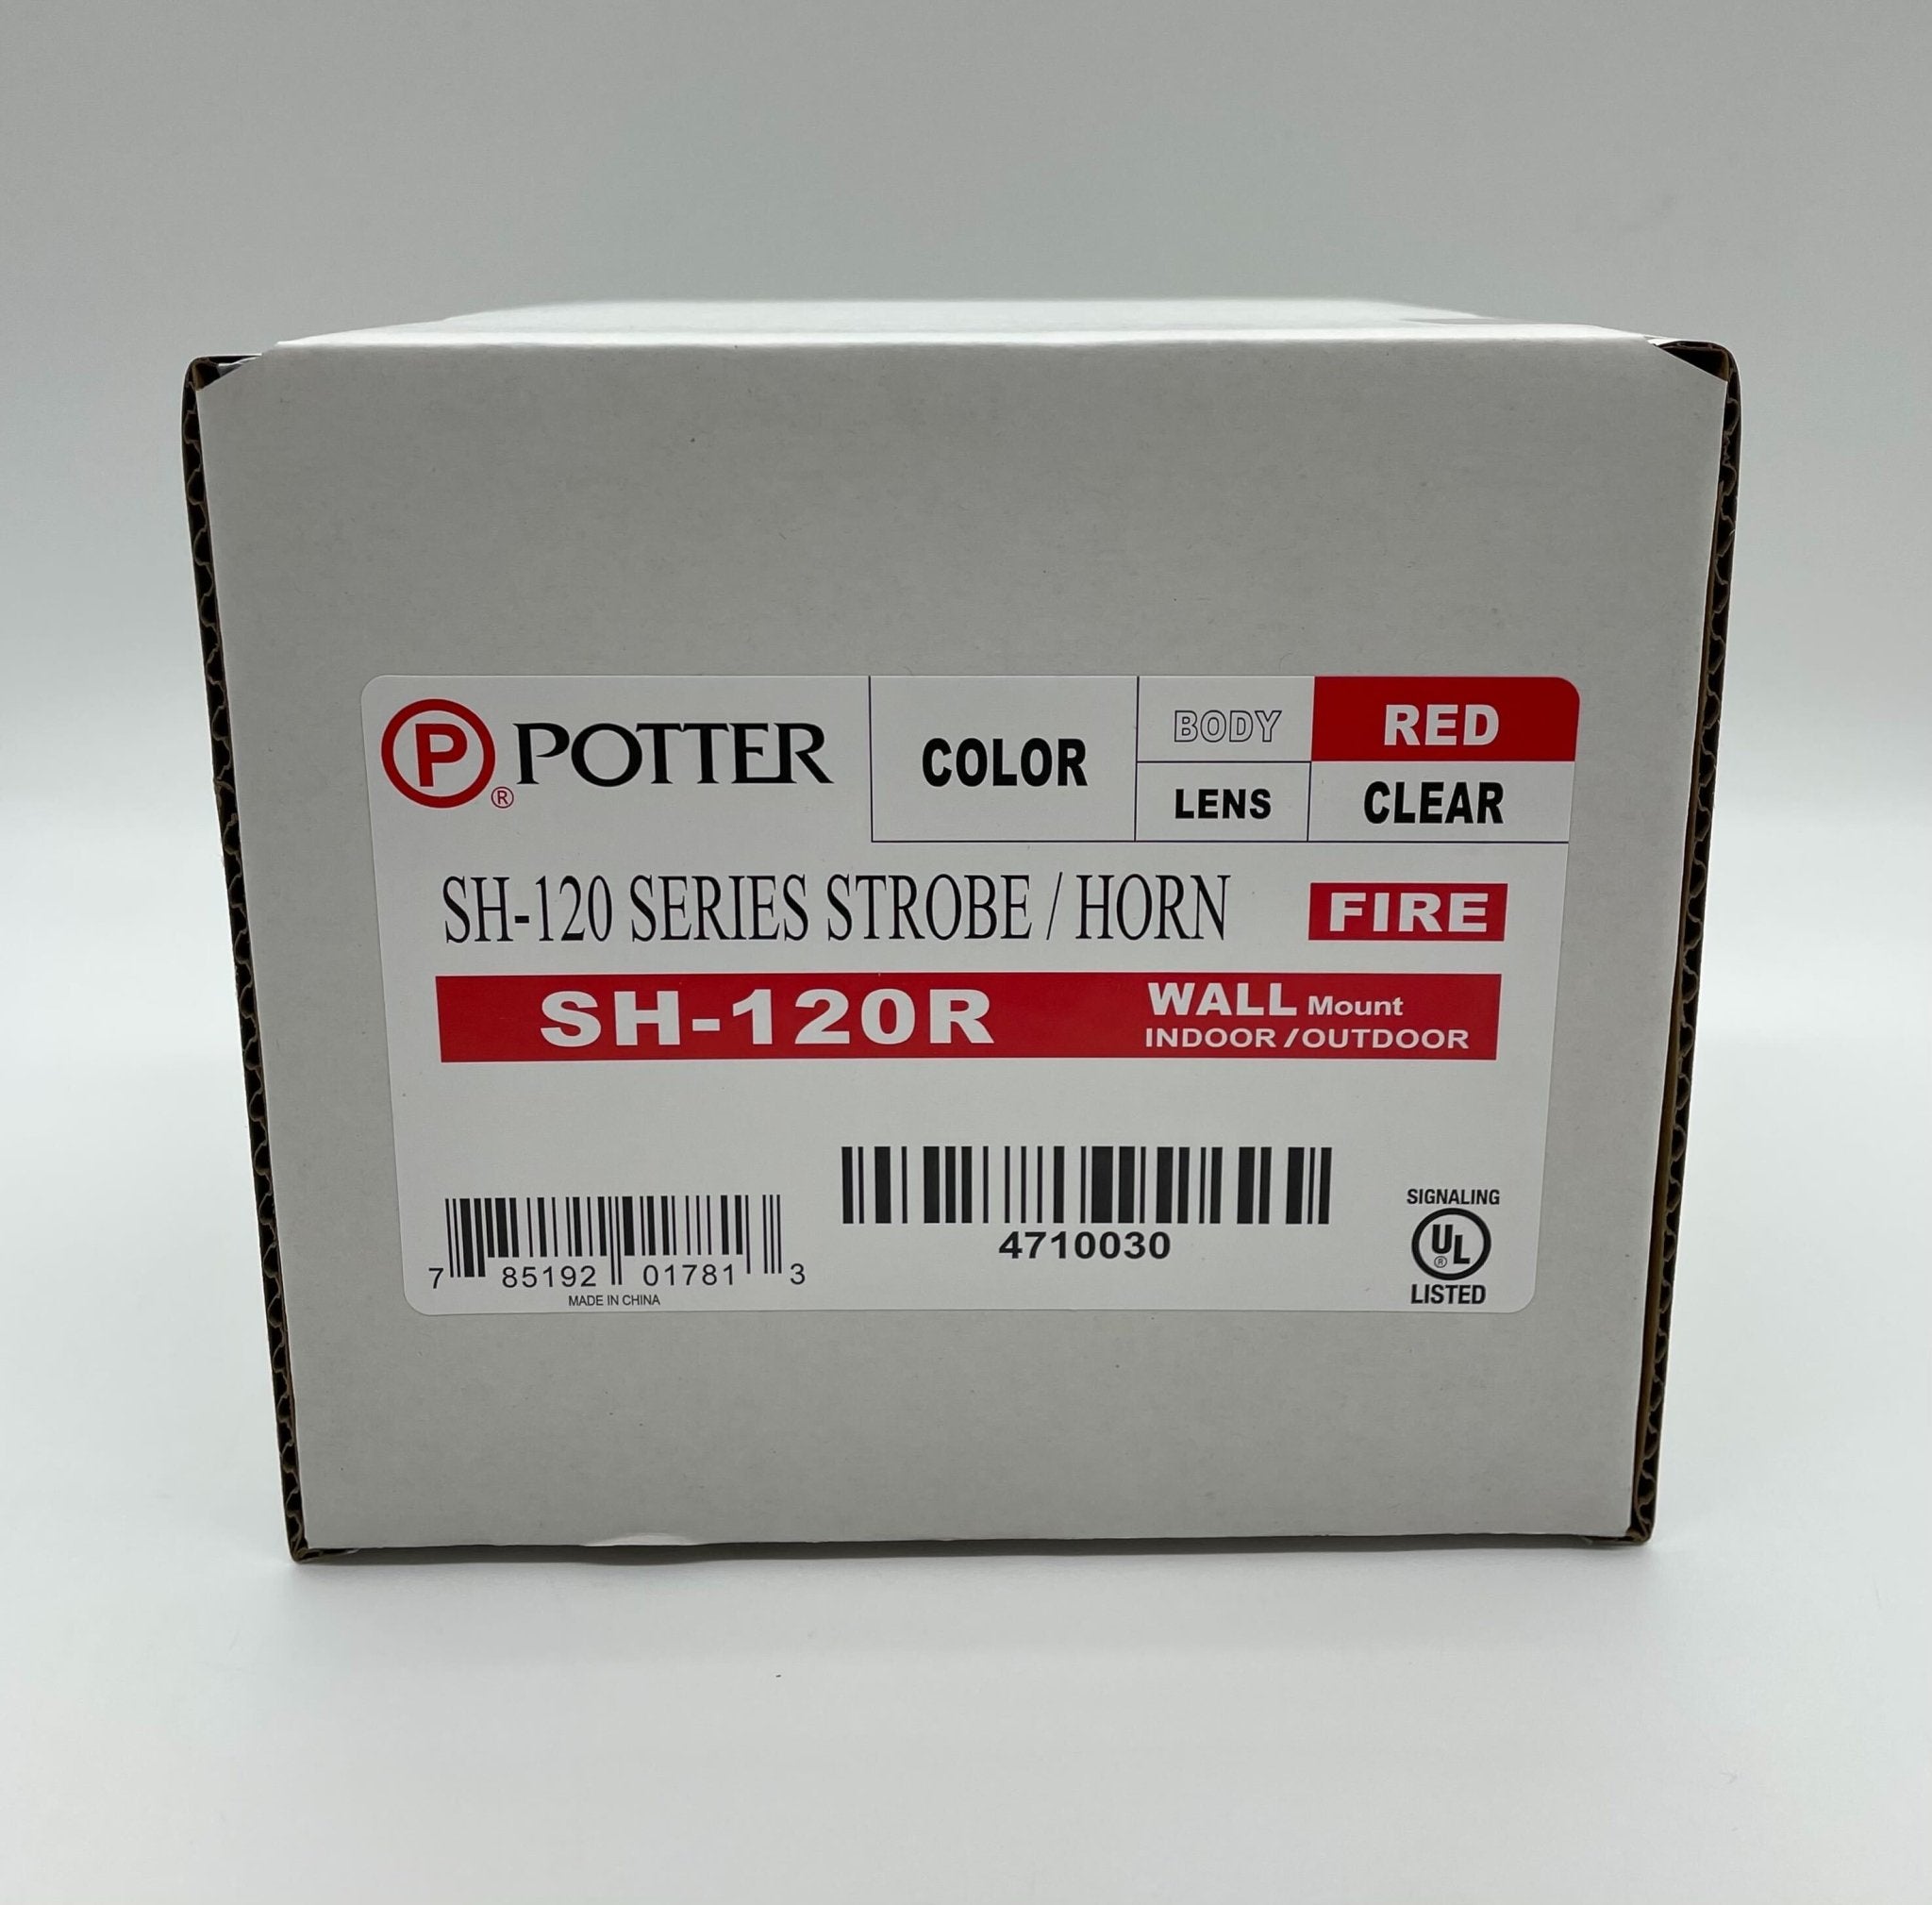 Potter SH-120R - The Fire Alarm Supplier